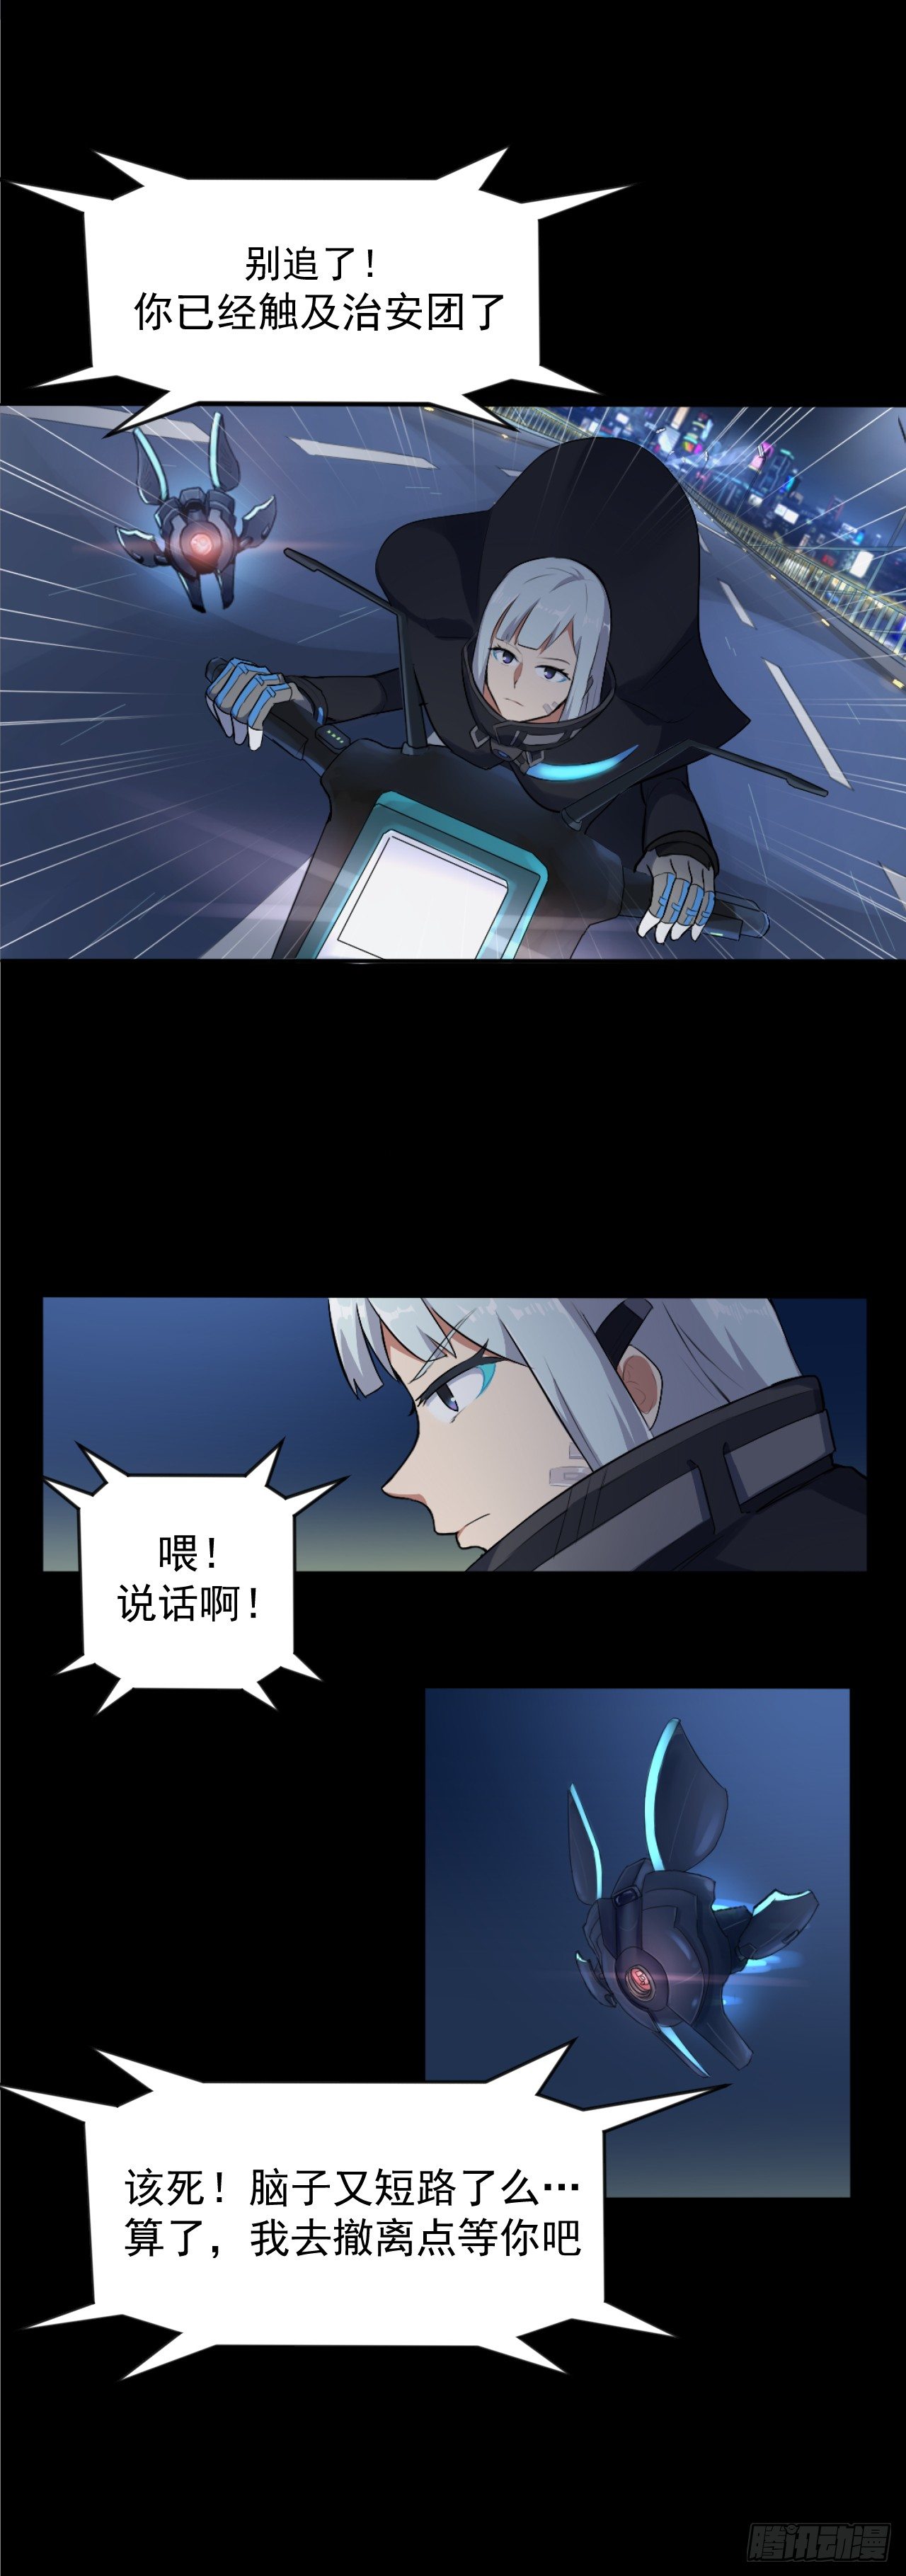 R7 - 03. 追殺 - 3